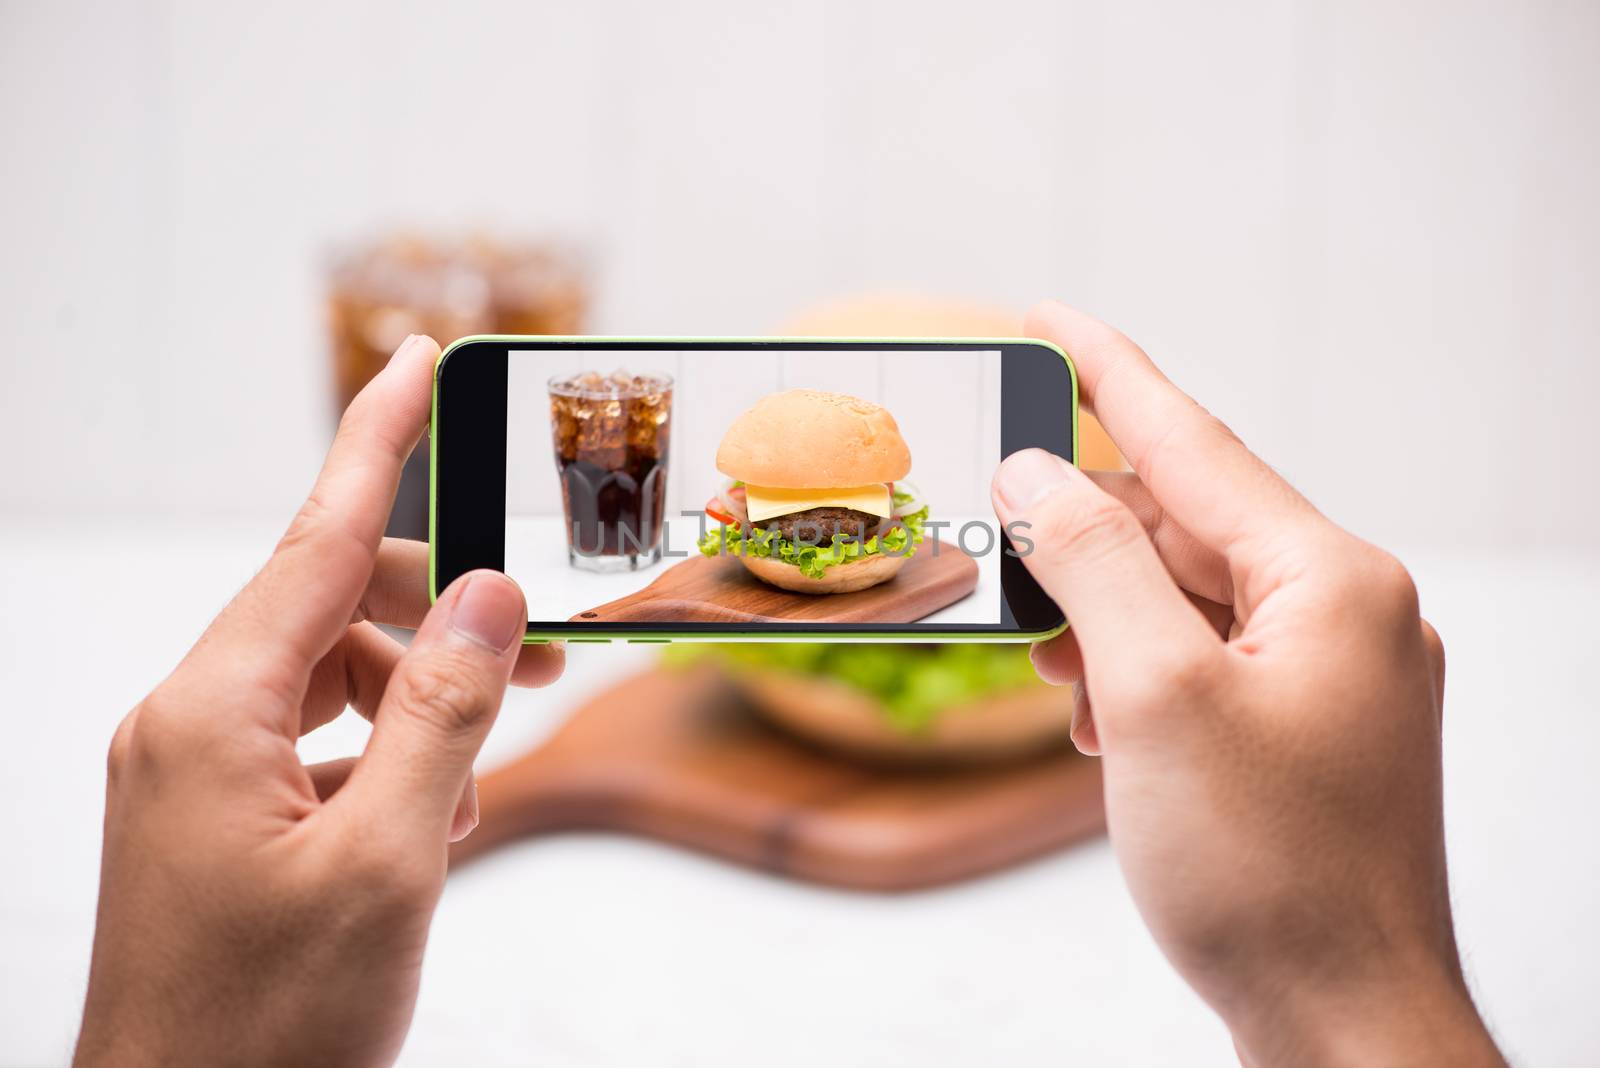 Hands hold smartphone taking photo of homemade BBQ burger